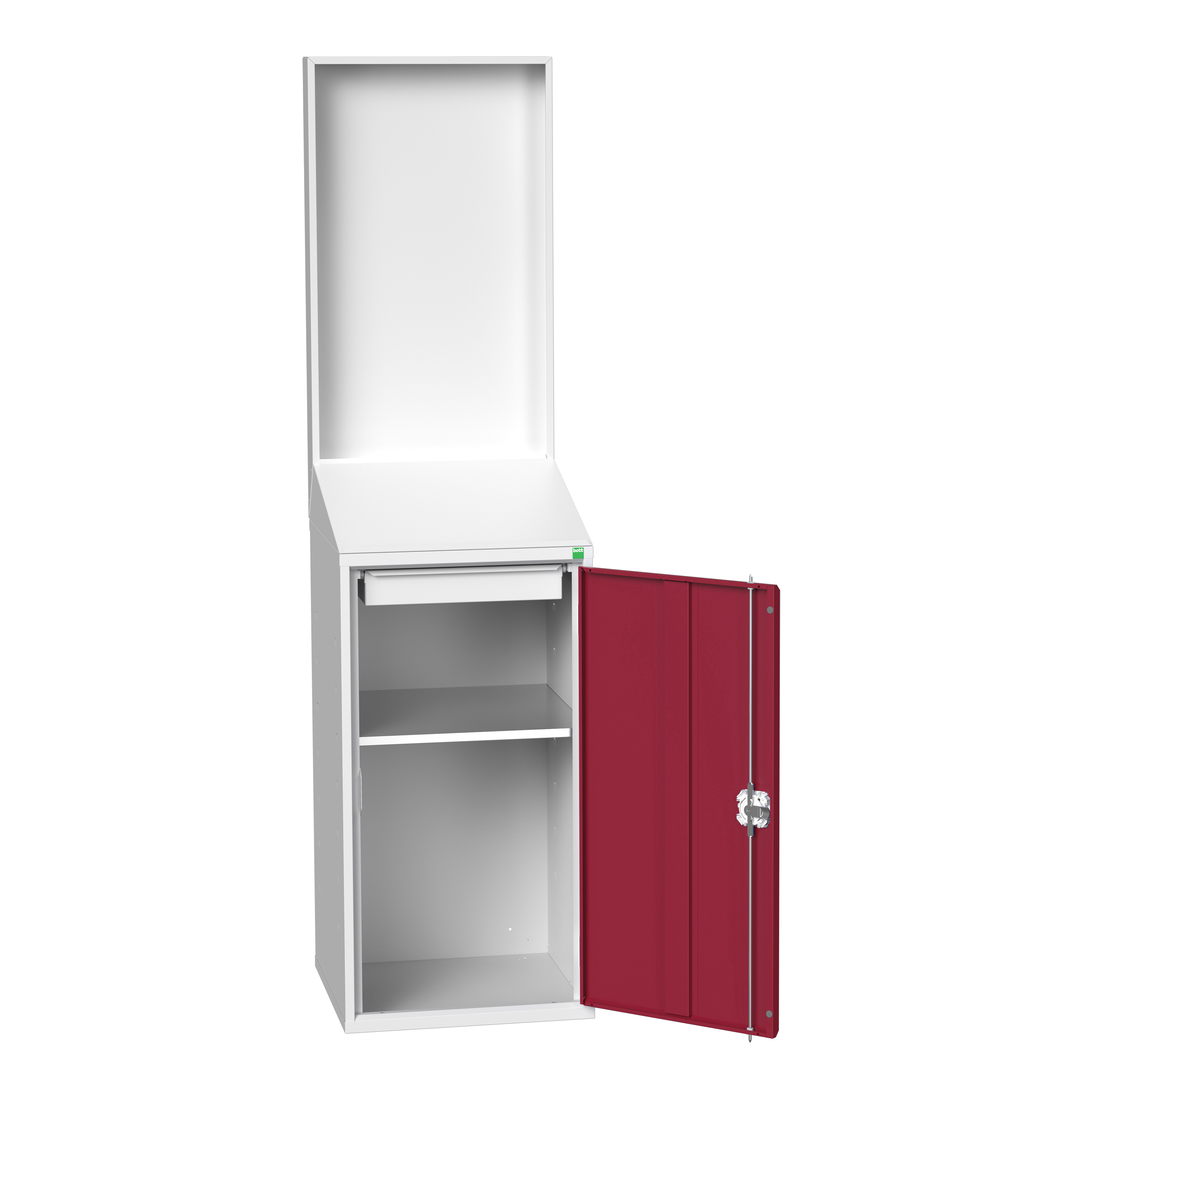 16929026.24 - verso economy lectern with backpanel